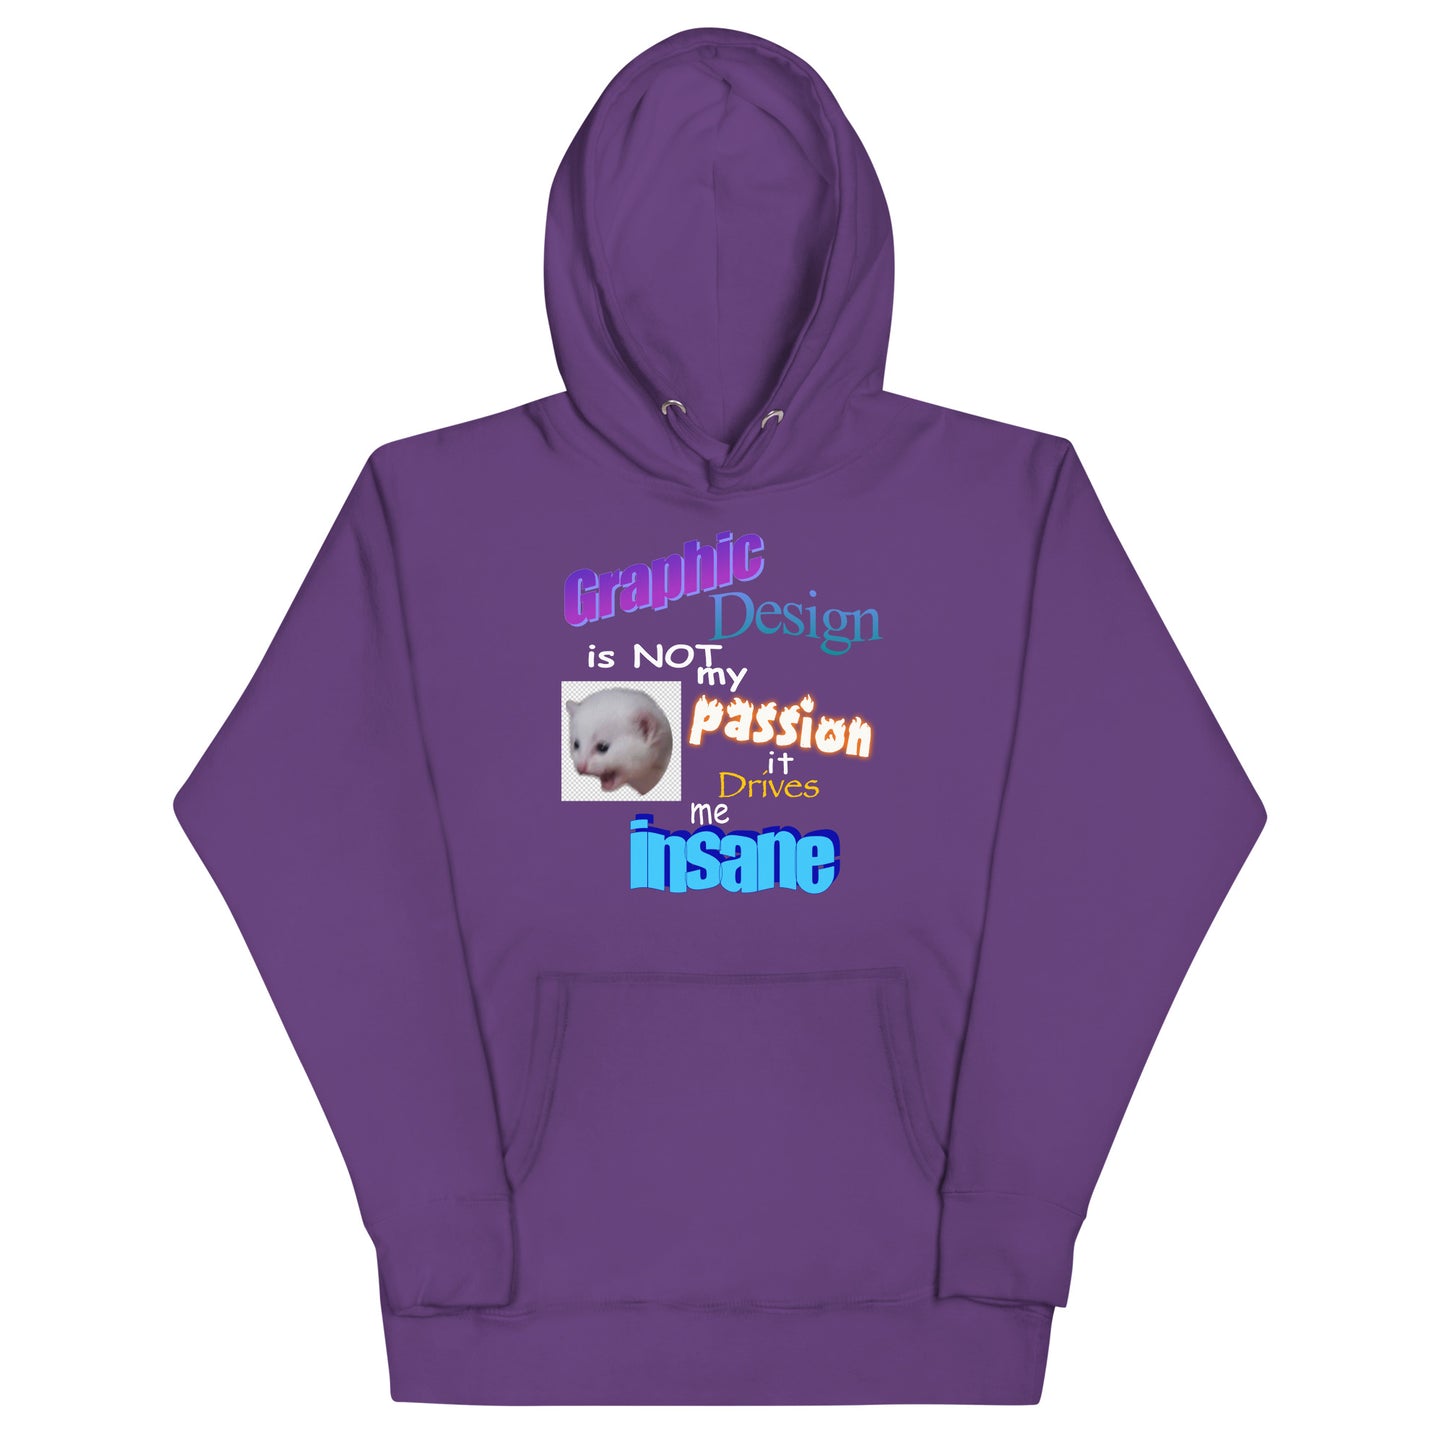 Graphic Design is NOT My Passion Unisex Hoodie